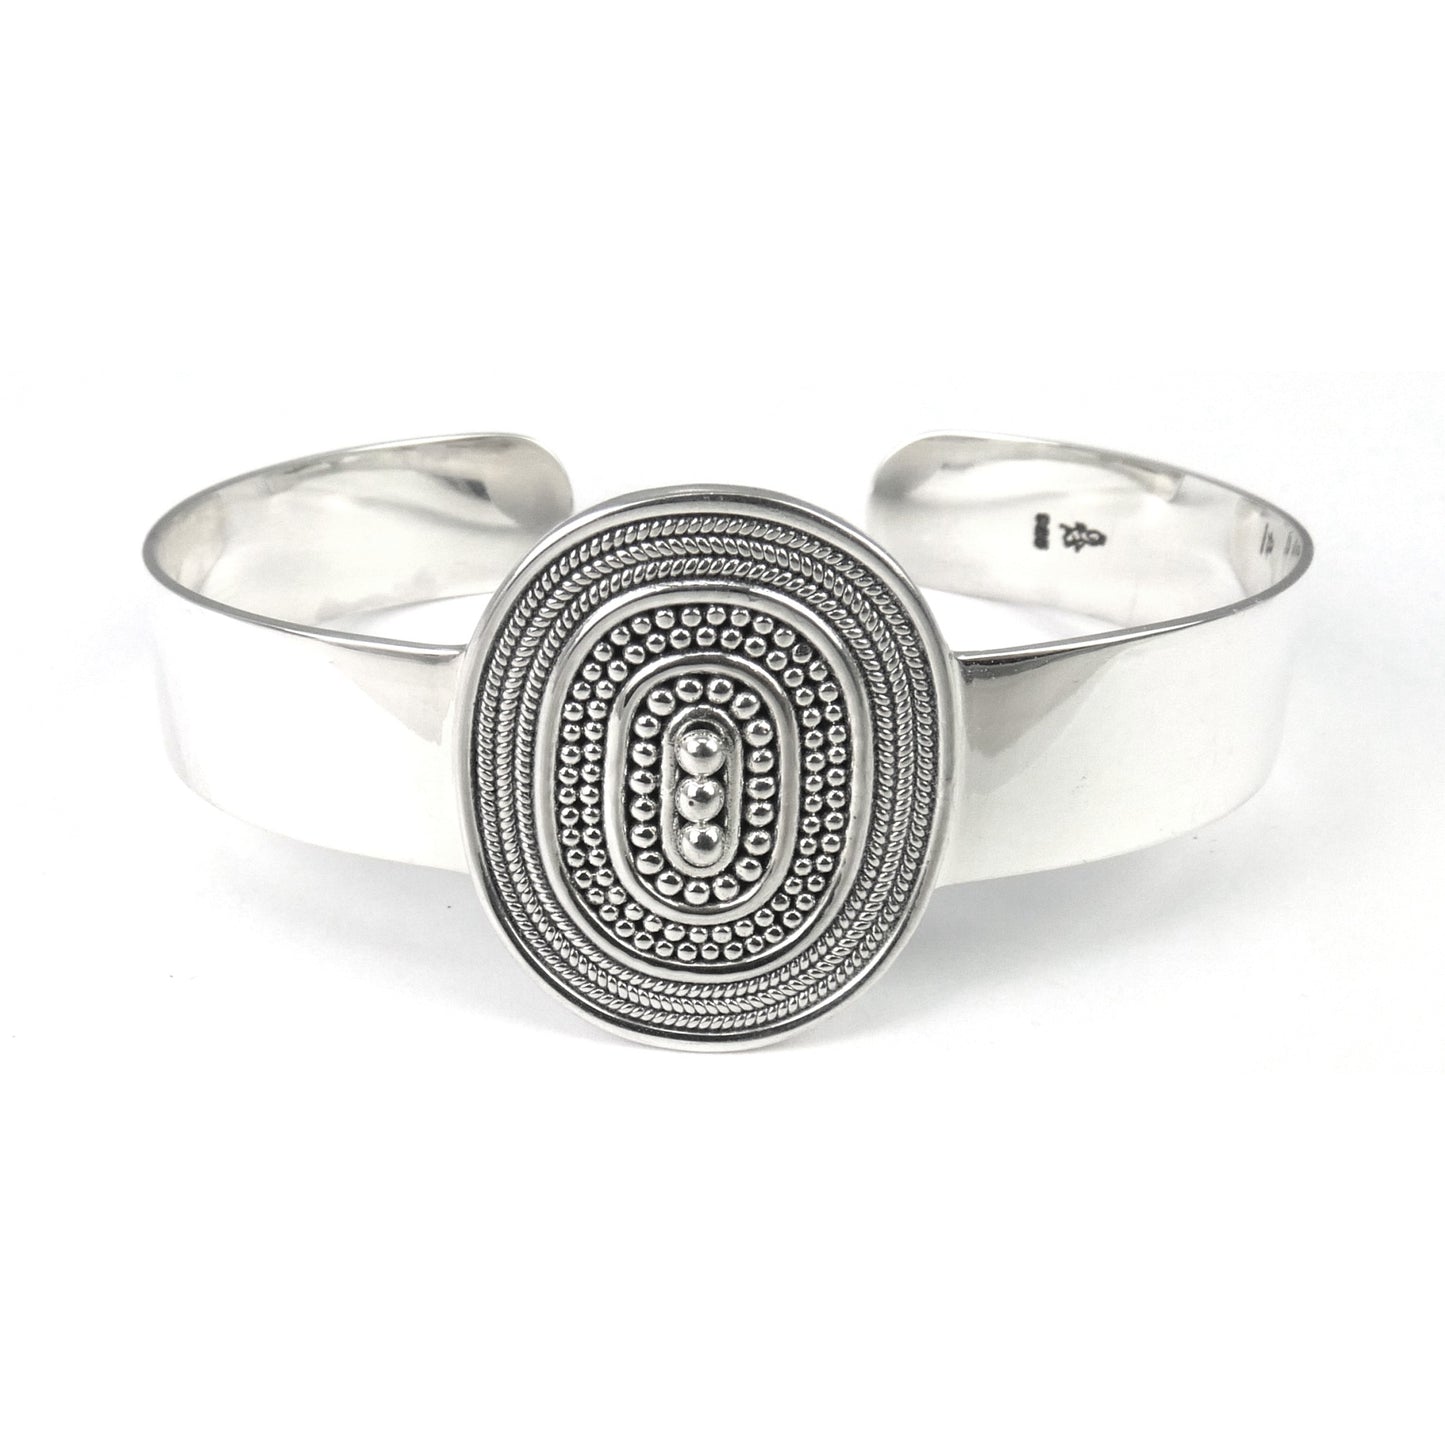 Silver cuff bracelet with one centered oval station with bead and rope decoration.